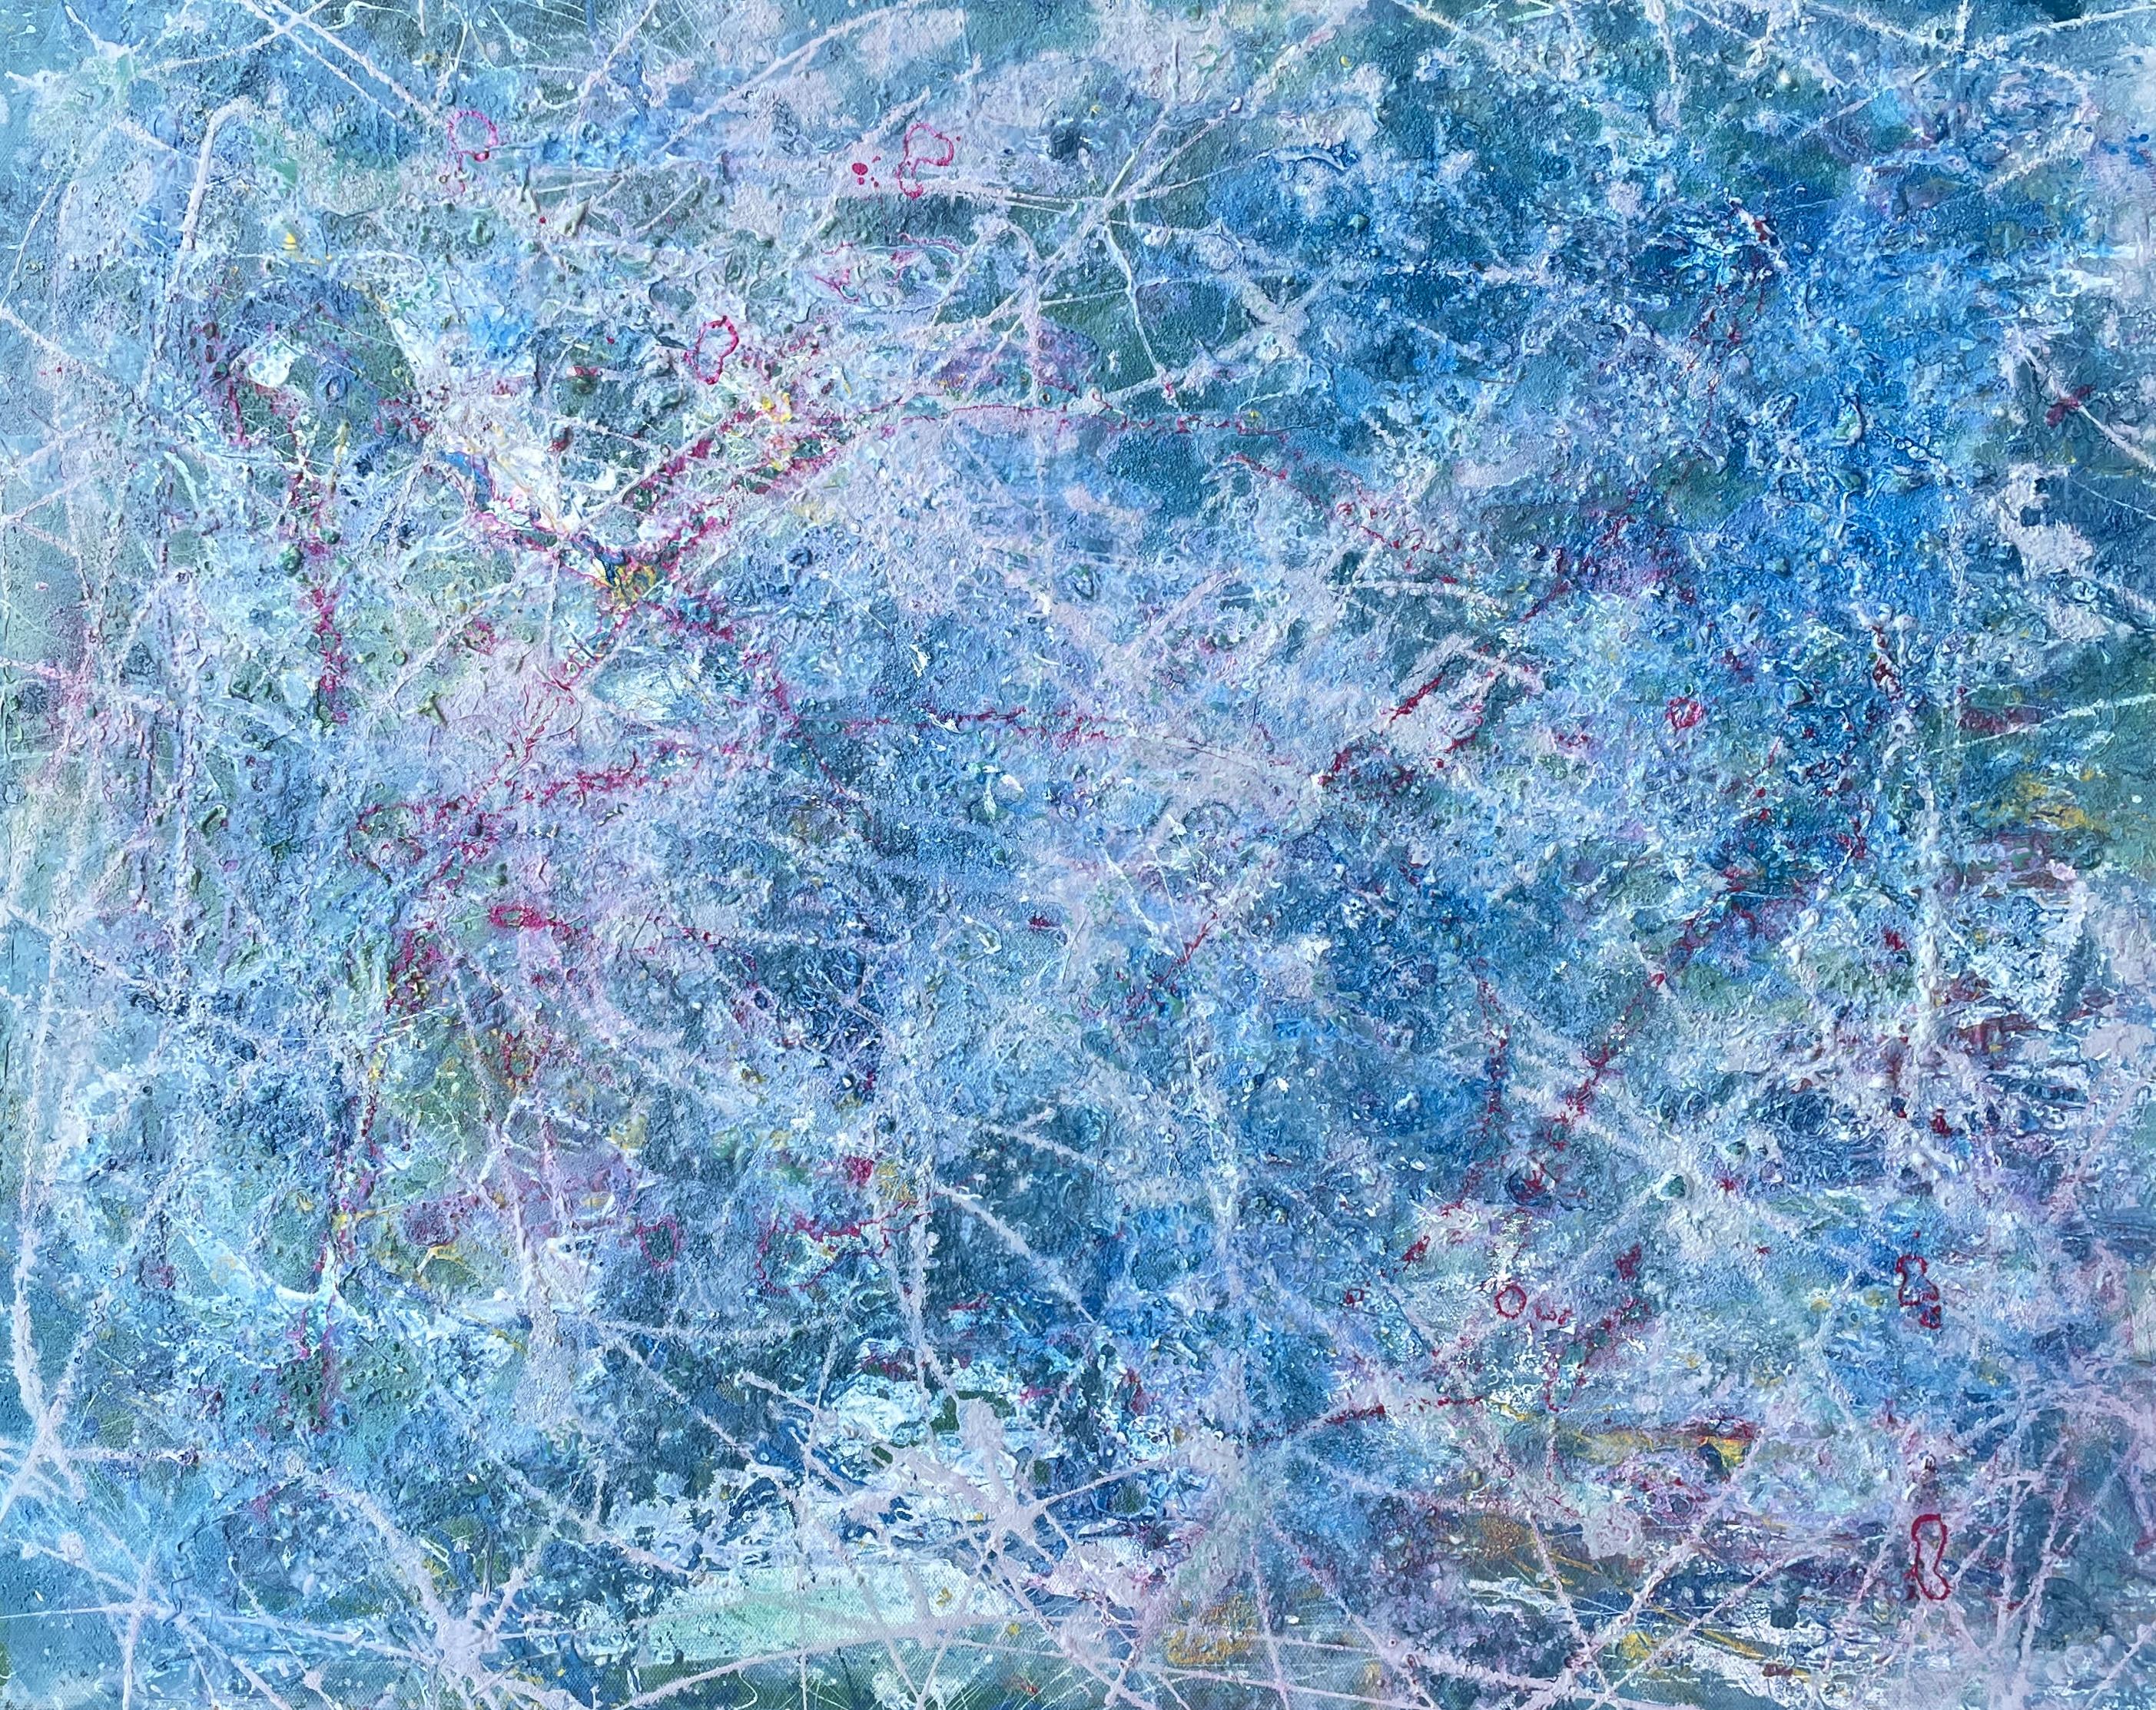 'Continuance' by Lori Poncsak is a stunning 24" x 30" acrylic on canvas that masterfully illustrates the fluidity and depth of abstract expressionism. This artwork features a rich tapestry of blues, from icy light hues to deep oceanic tones,